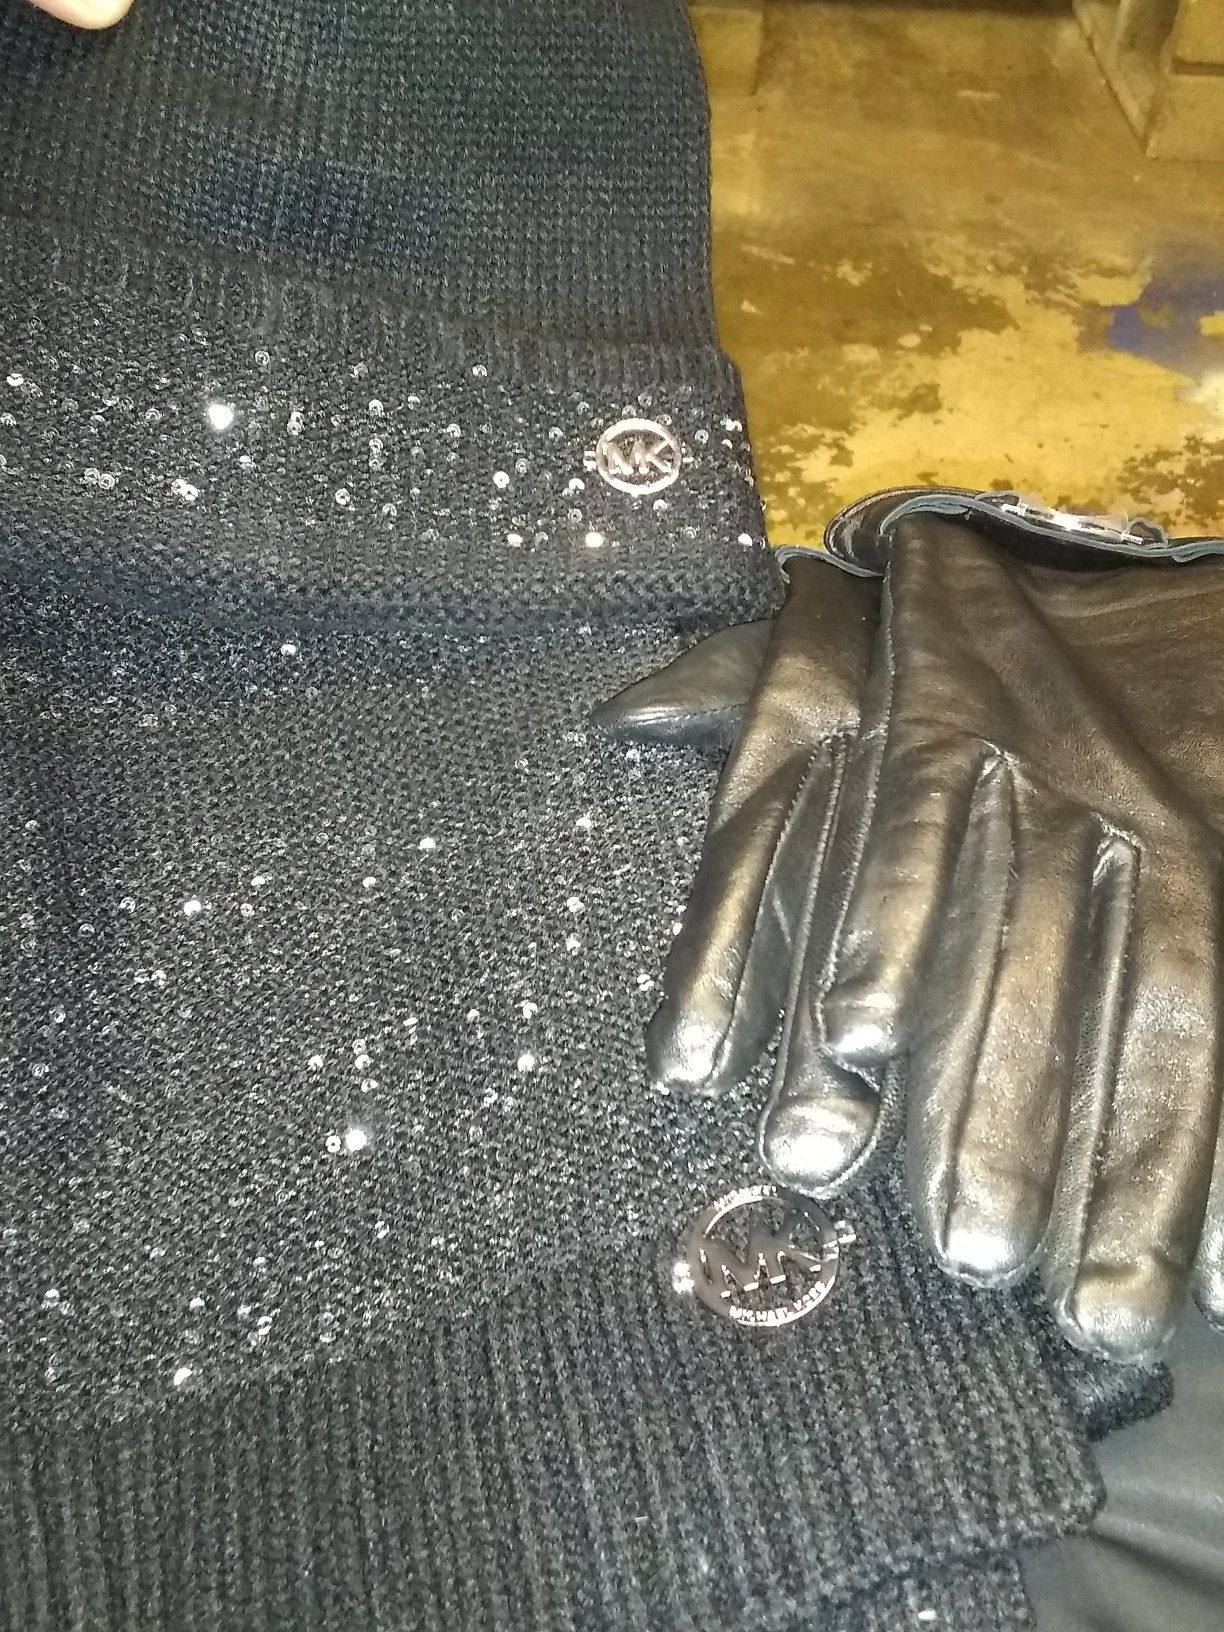 Michael Kors hat, scarf, and leather gloves for Sale in Holden, MO - OfferUp